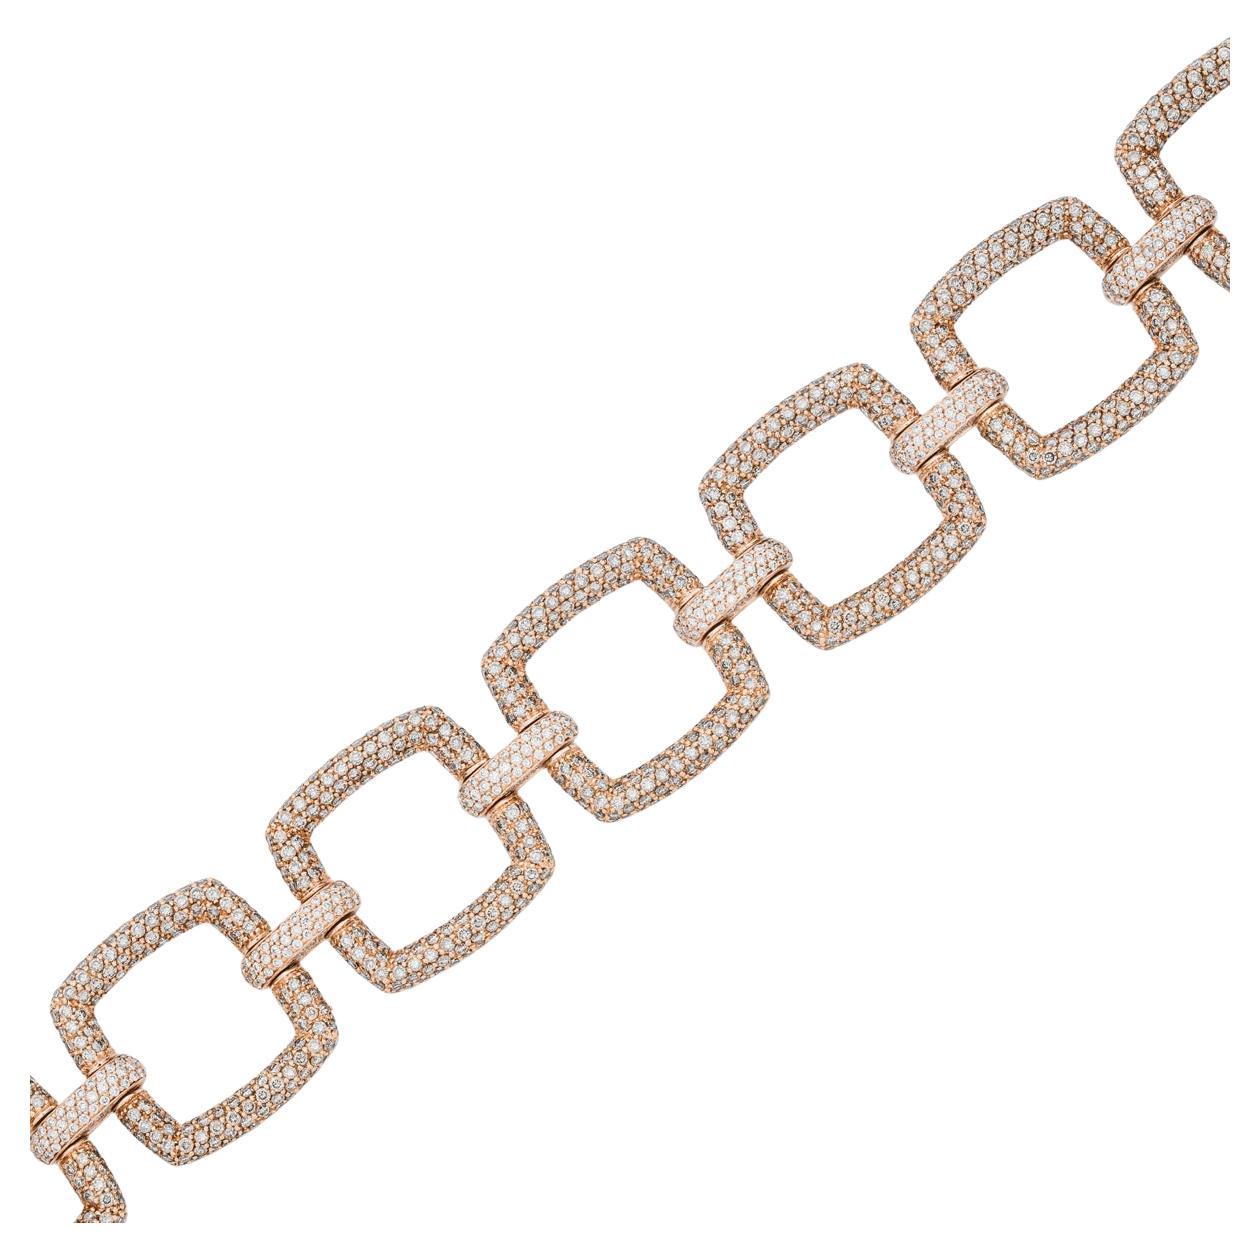 A gorgeous 18k rose gold diamond link bracelet. The bracelet features 7 square links adorned with 1,190 pave set round brilliant cut brown diamonds, with an approximate total weight of 11.90ct. Linking the square motifs together is 7 bar motifs pave